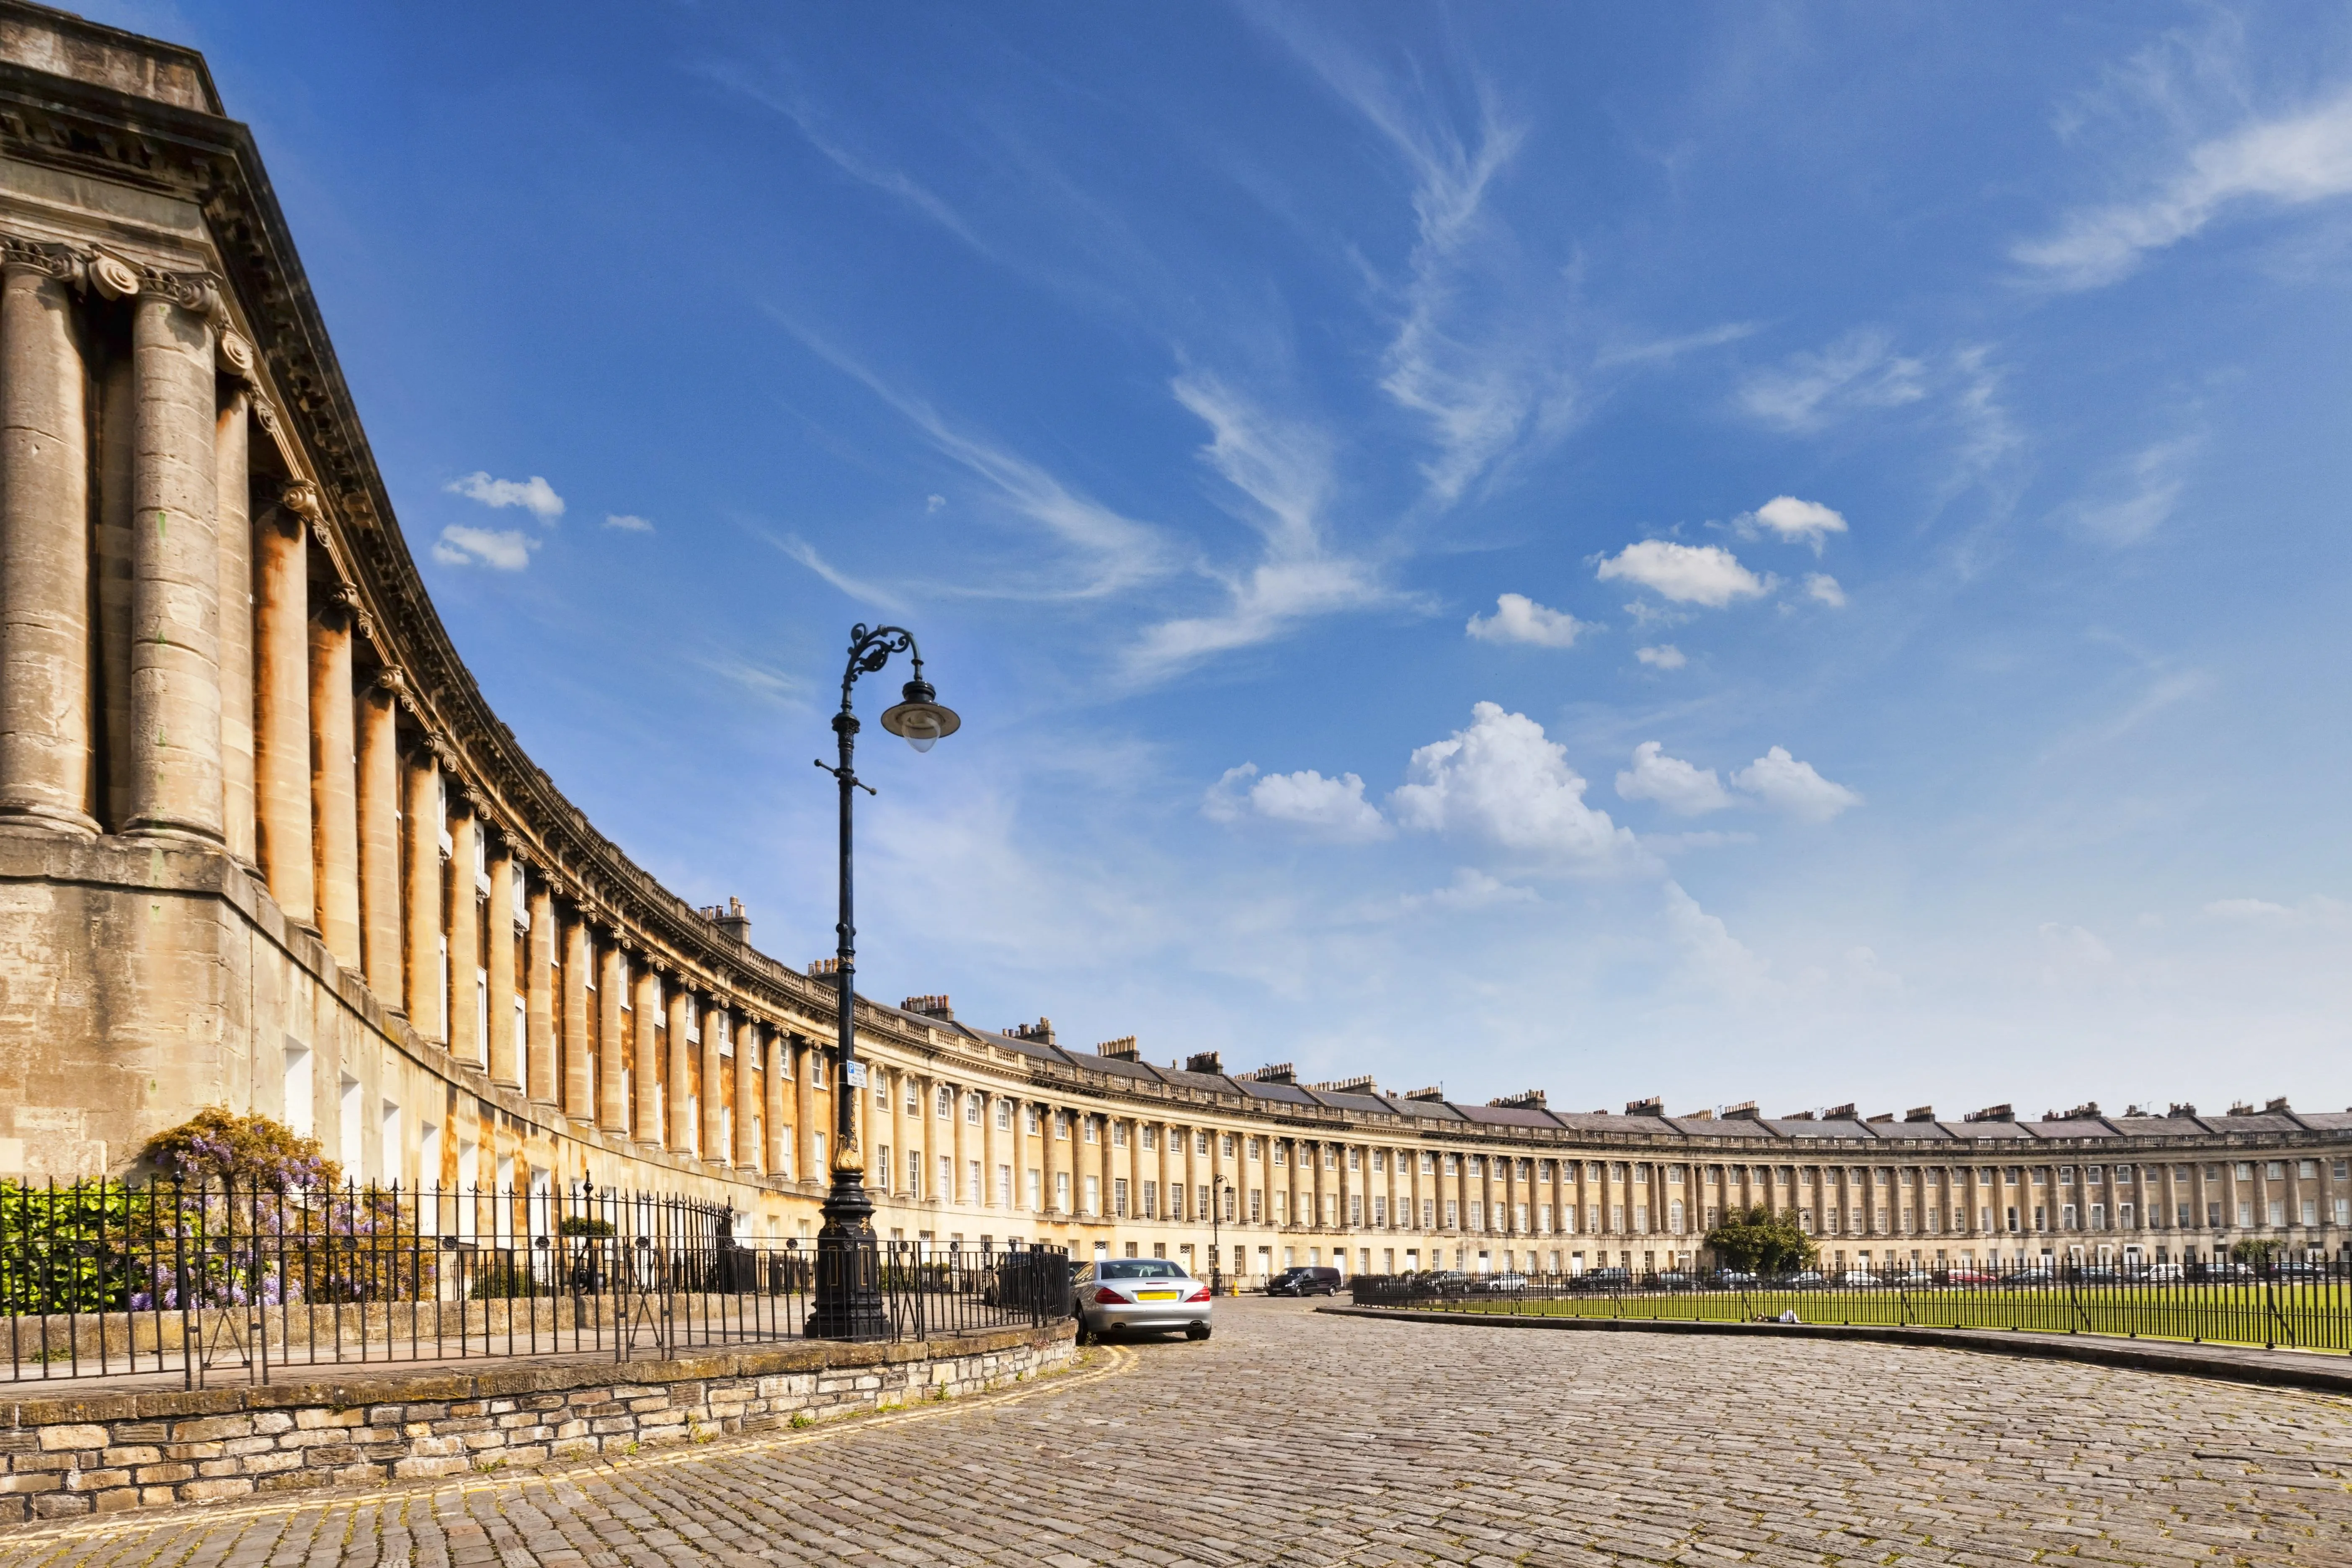 The Royal Crescent in Bath, one of the filming locations for Bridgerton